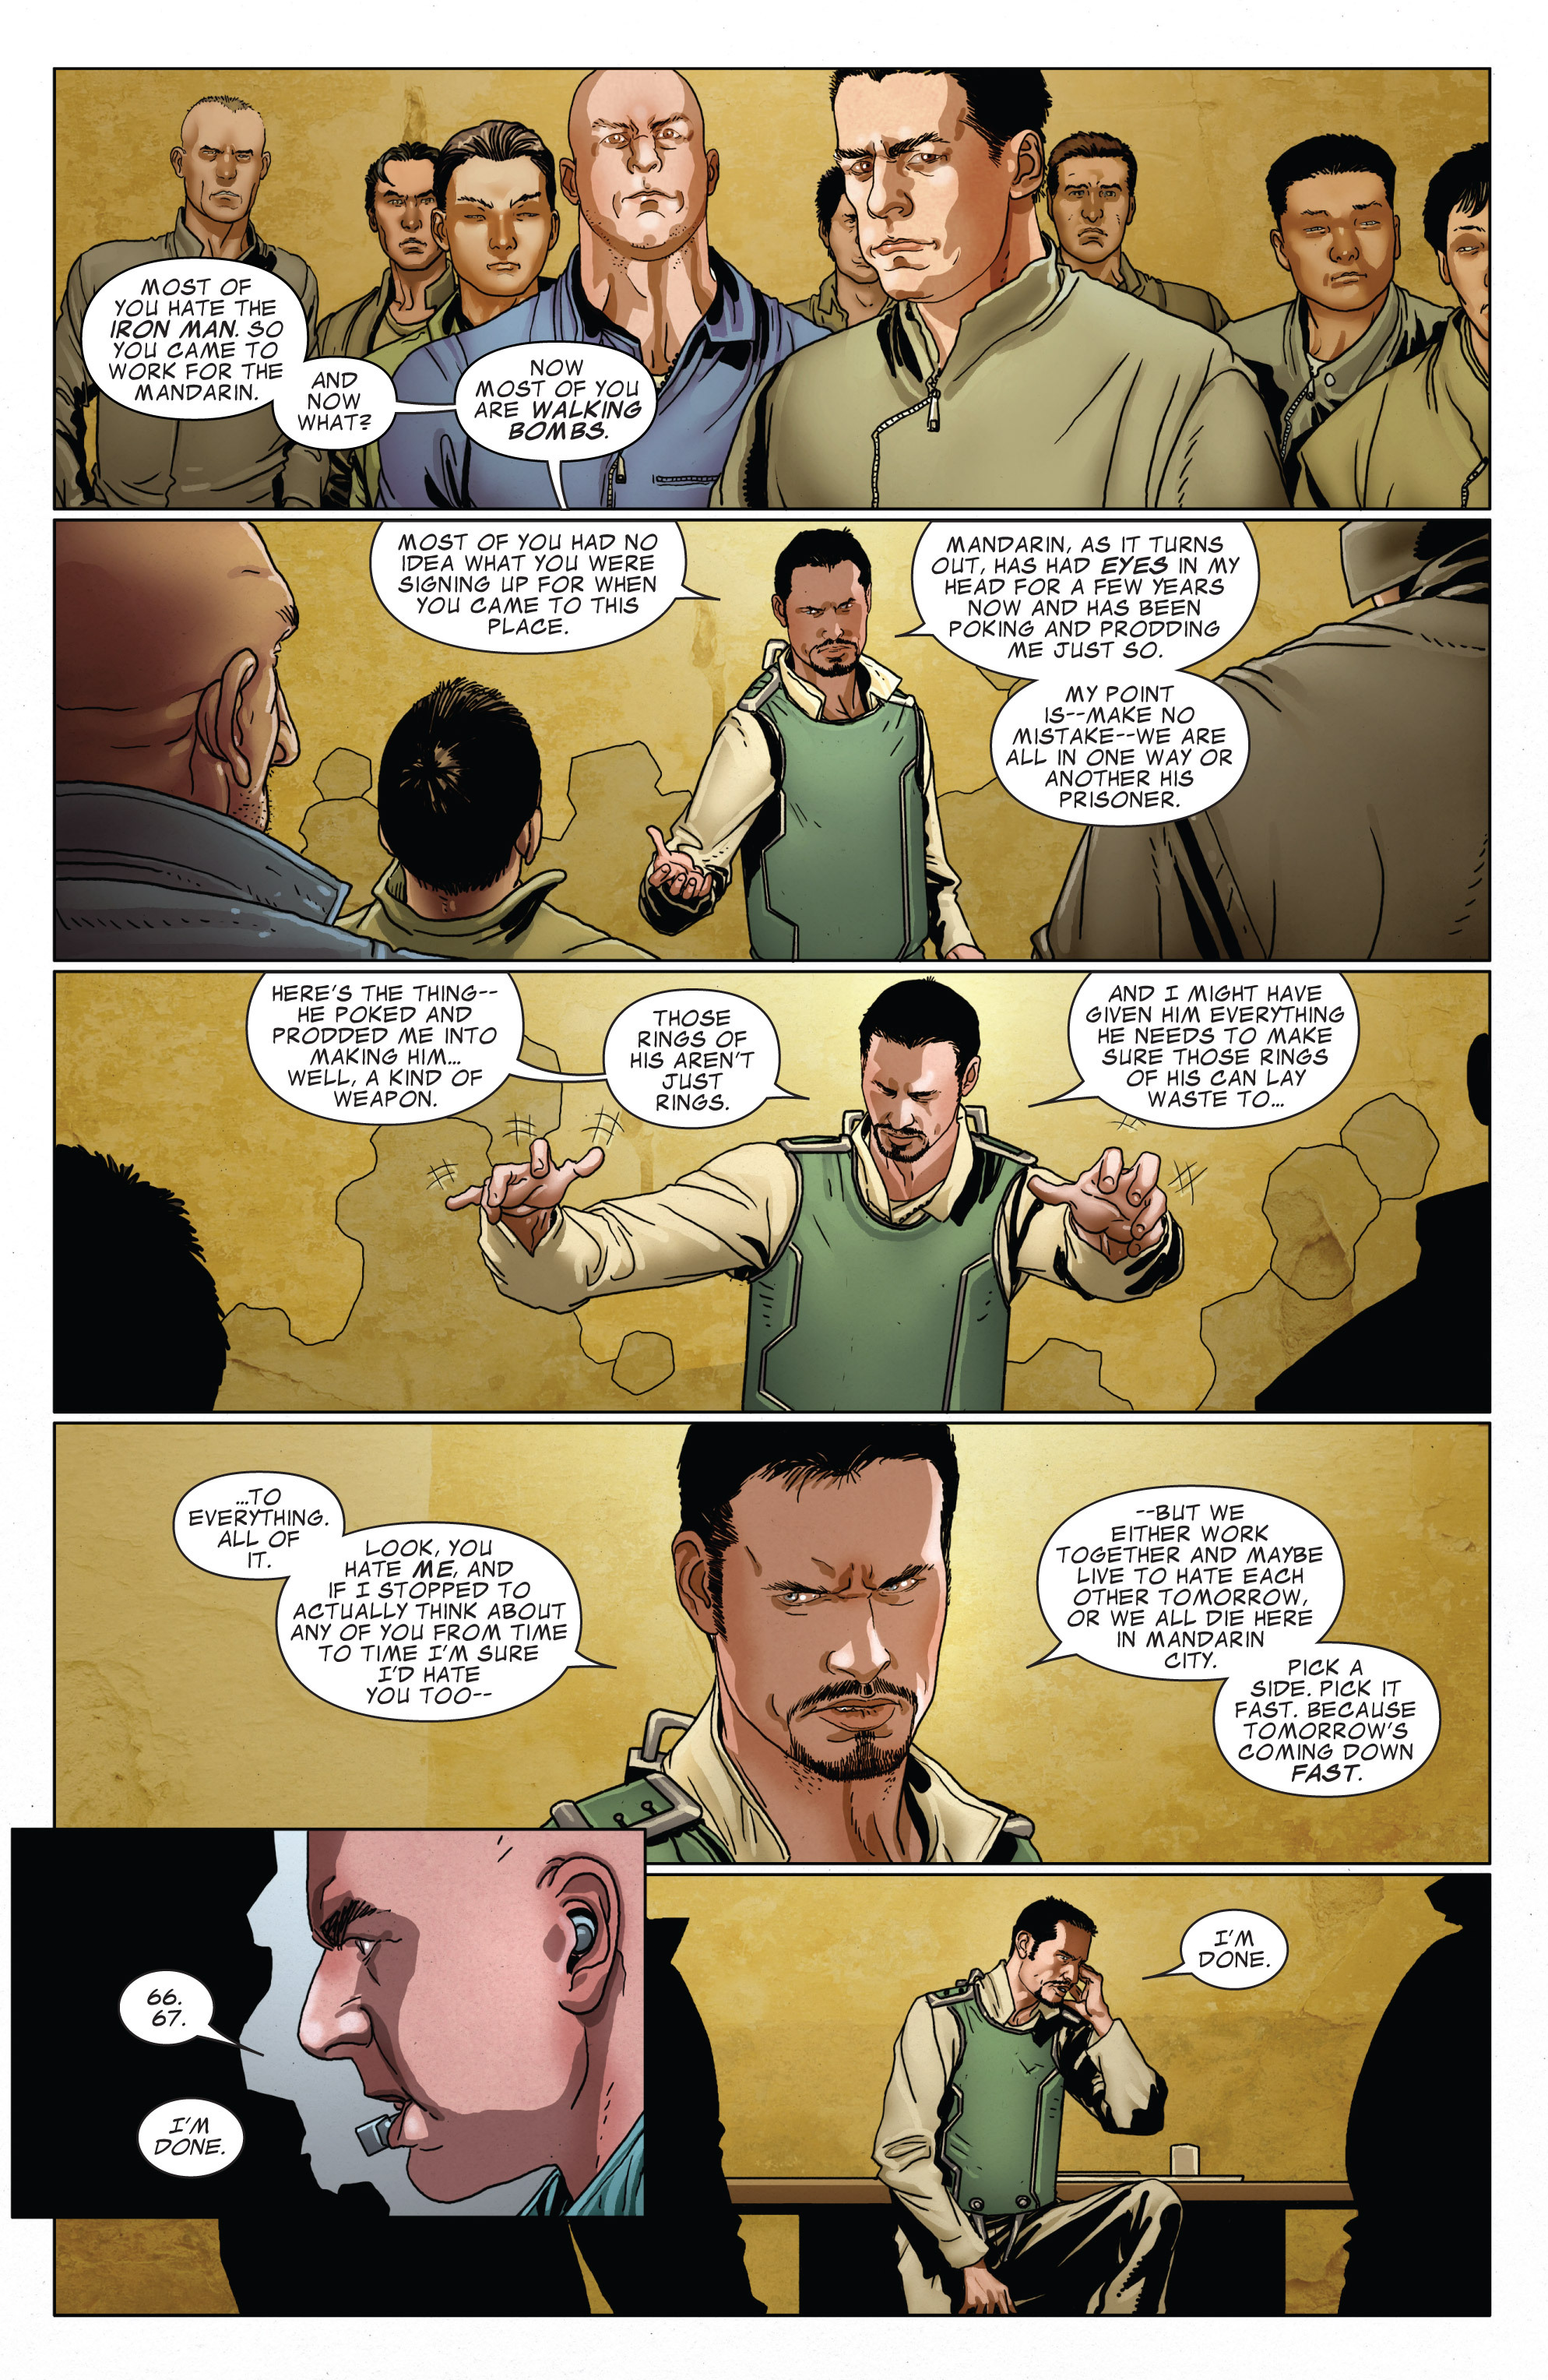 Invincible Iron Man (2008) 523 Page 16